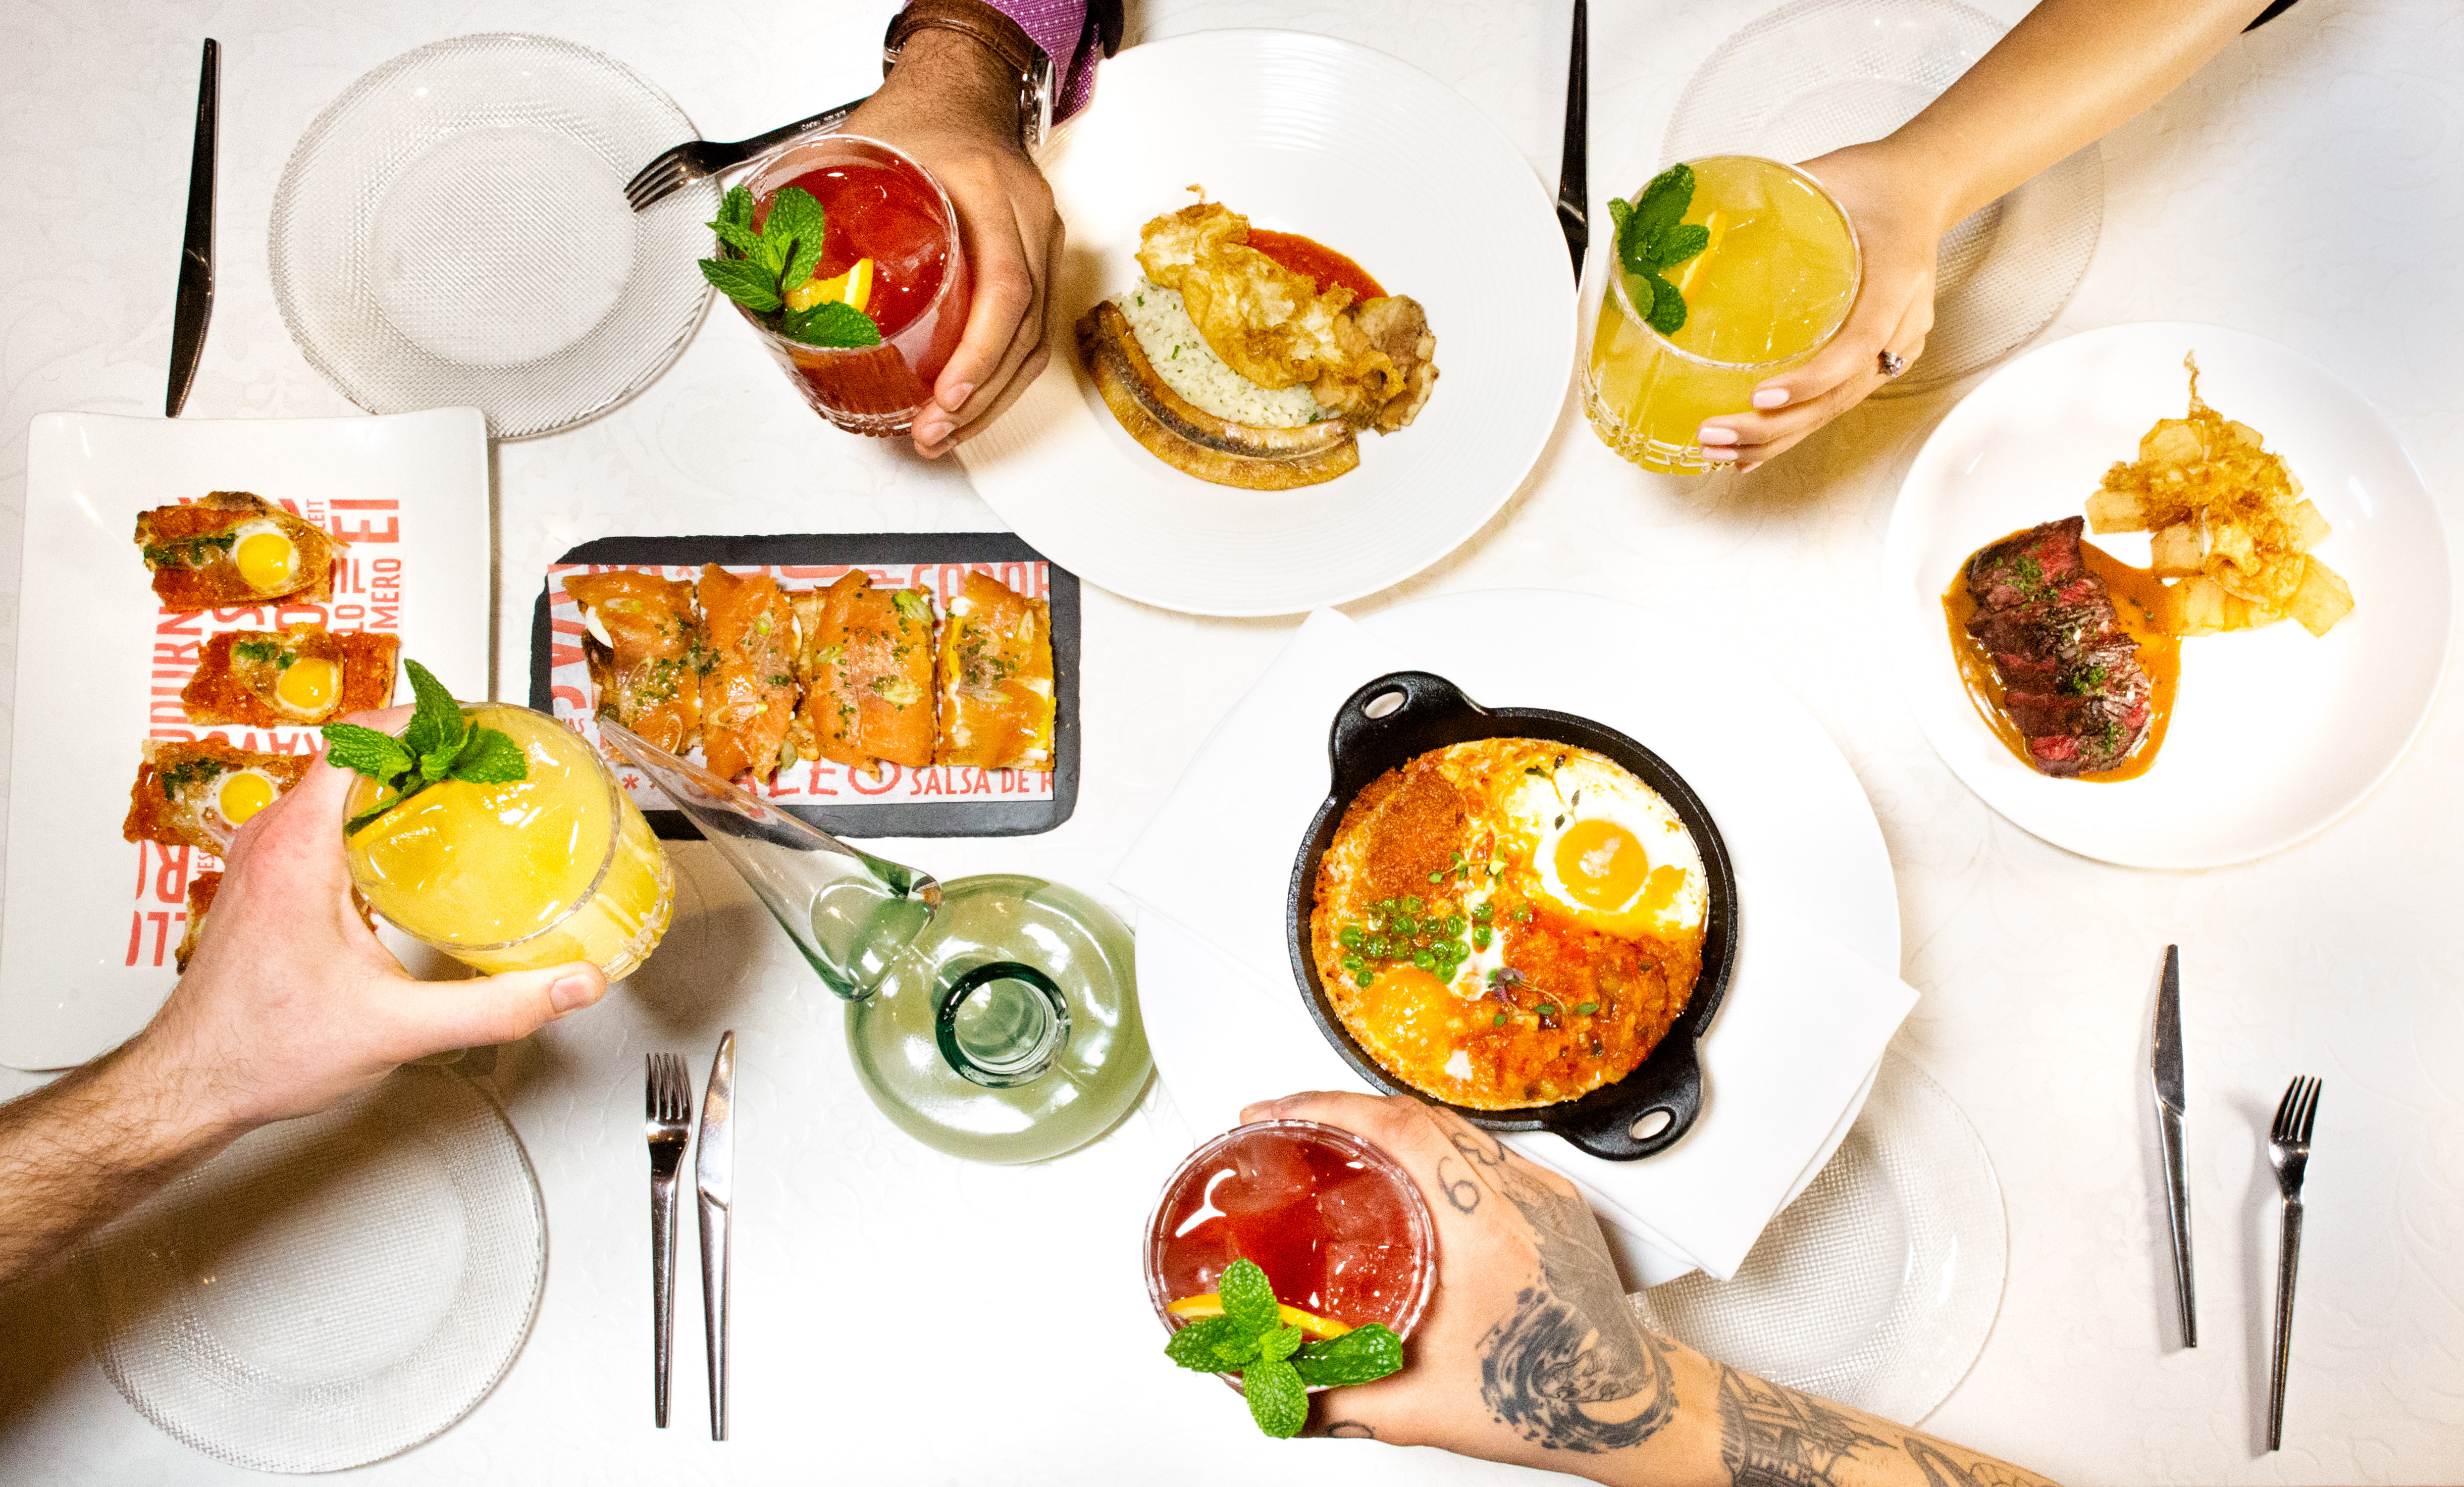 An overhead view of brunch dishes at Jaleo